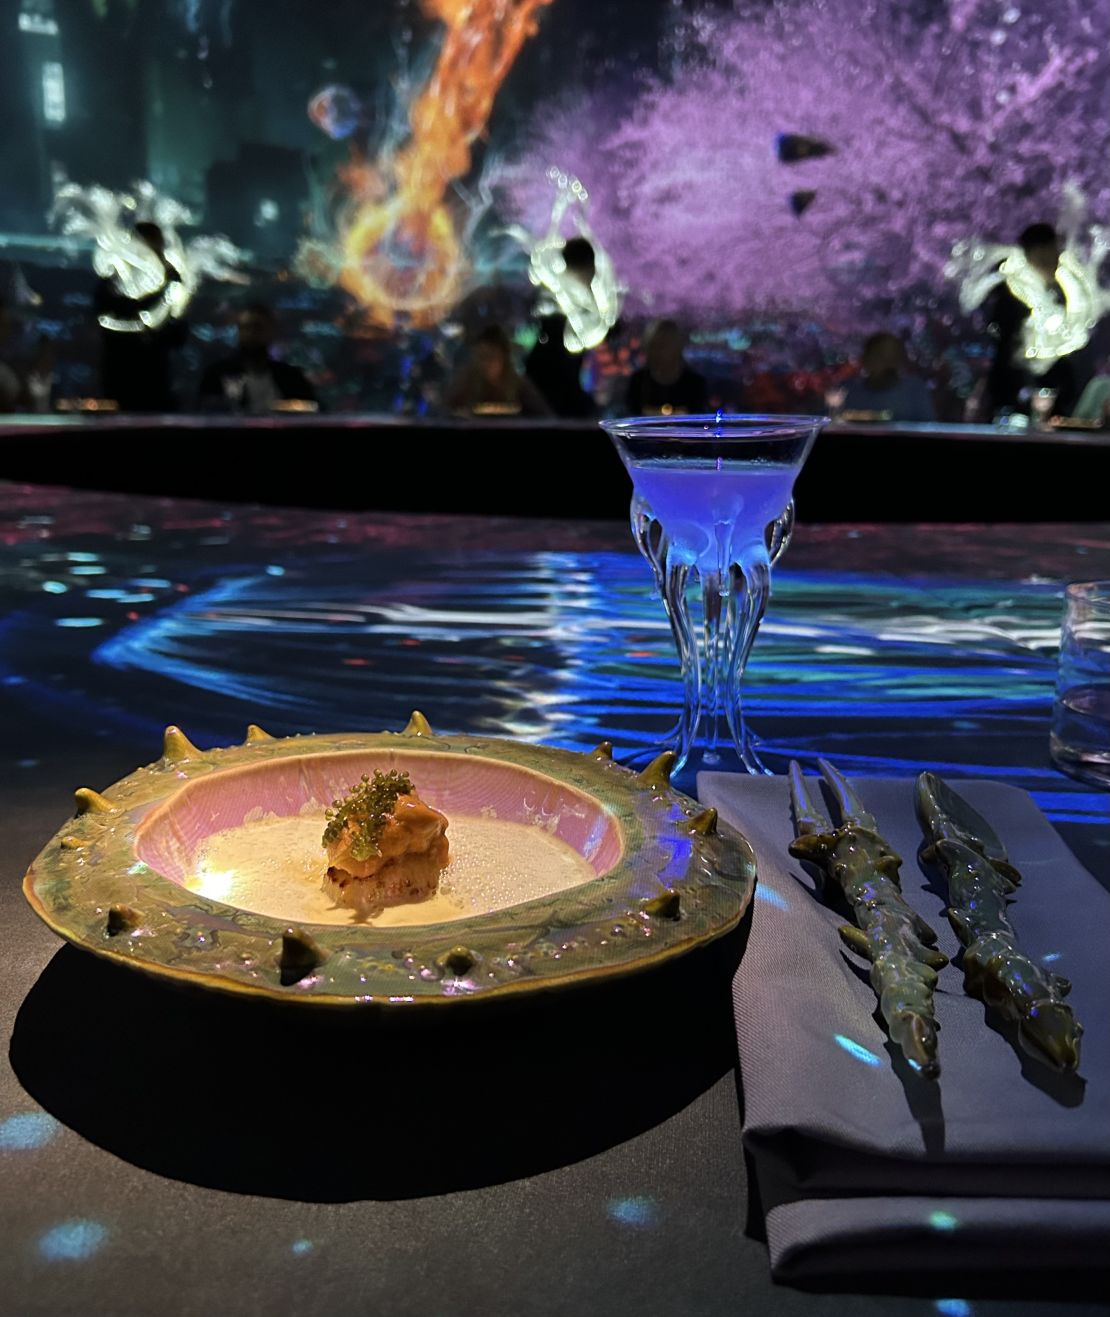 At Krasota, technology is complemented by old-fashioned theatrics — such as custom-made ceramic plates and cutlery in the style of sea urchins and crab claws to help evoke the experience of dining underwater.